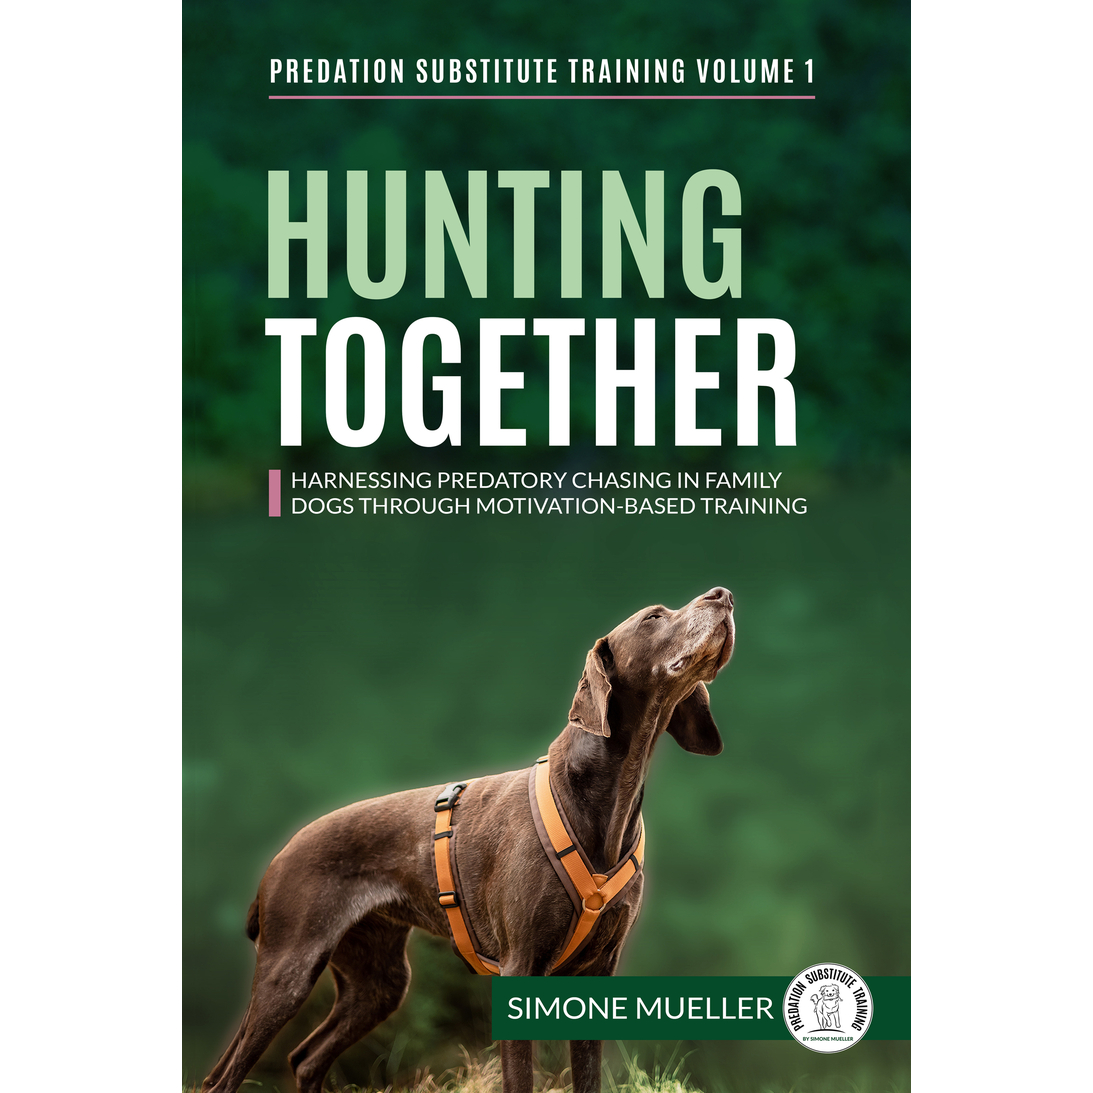 Hunting Together 2nd Edition eBook by Simone Mueller Harnessing Predatory Chasing in Family Dogs Through Motivation-Based Training Predation Substitute Training – Volume 1 Second Edition